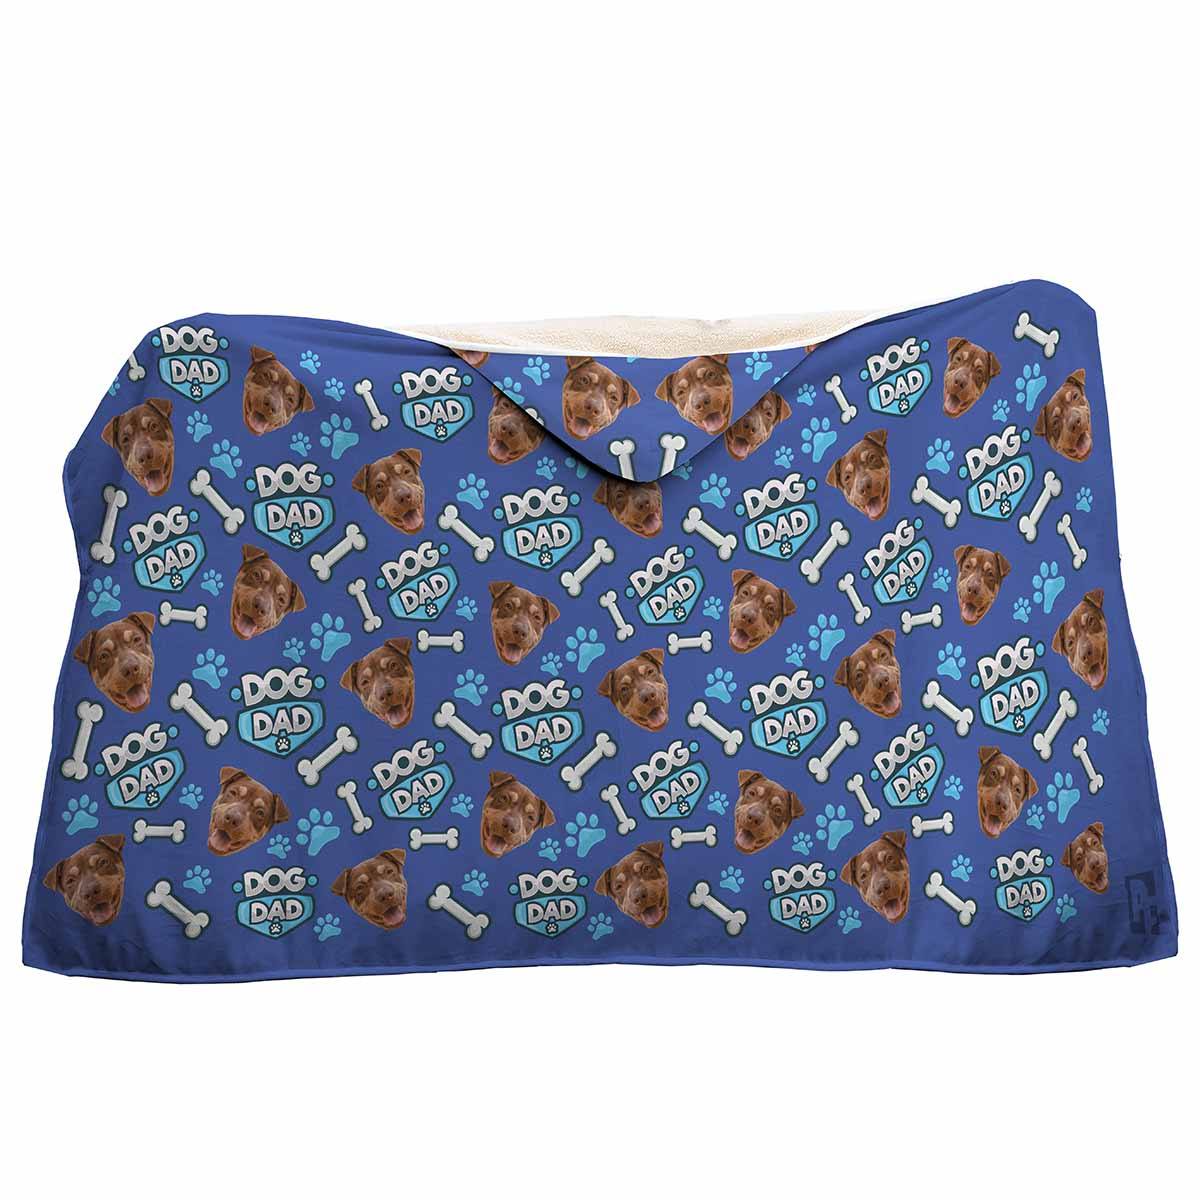 darkblue Dog Dad hooded blanket personalized with photo of face printed on it